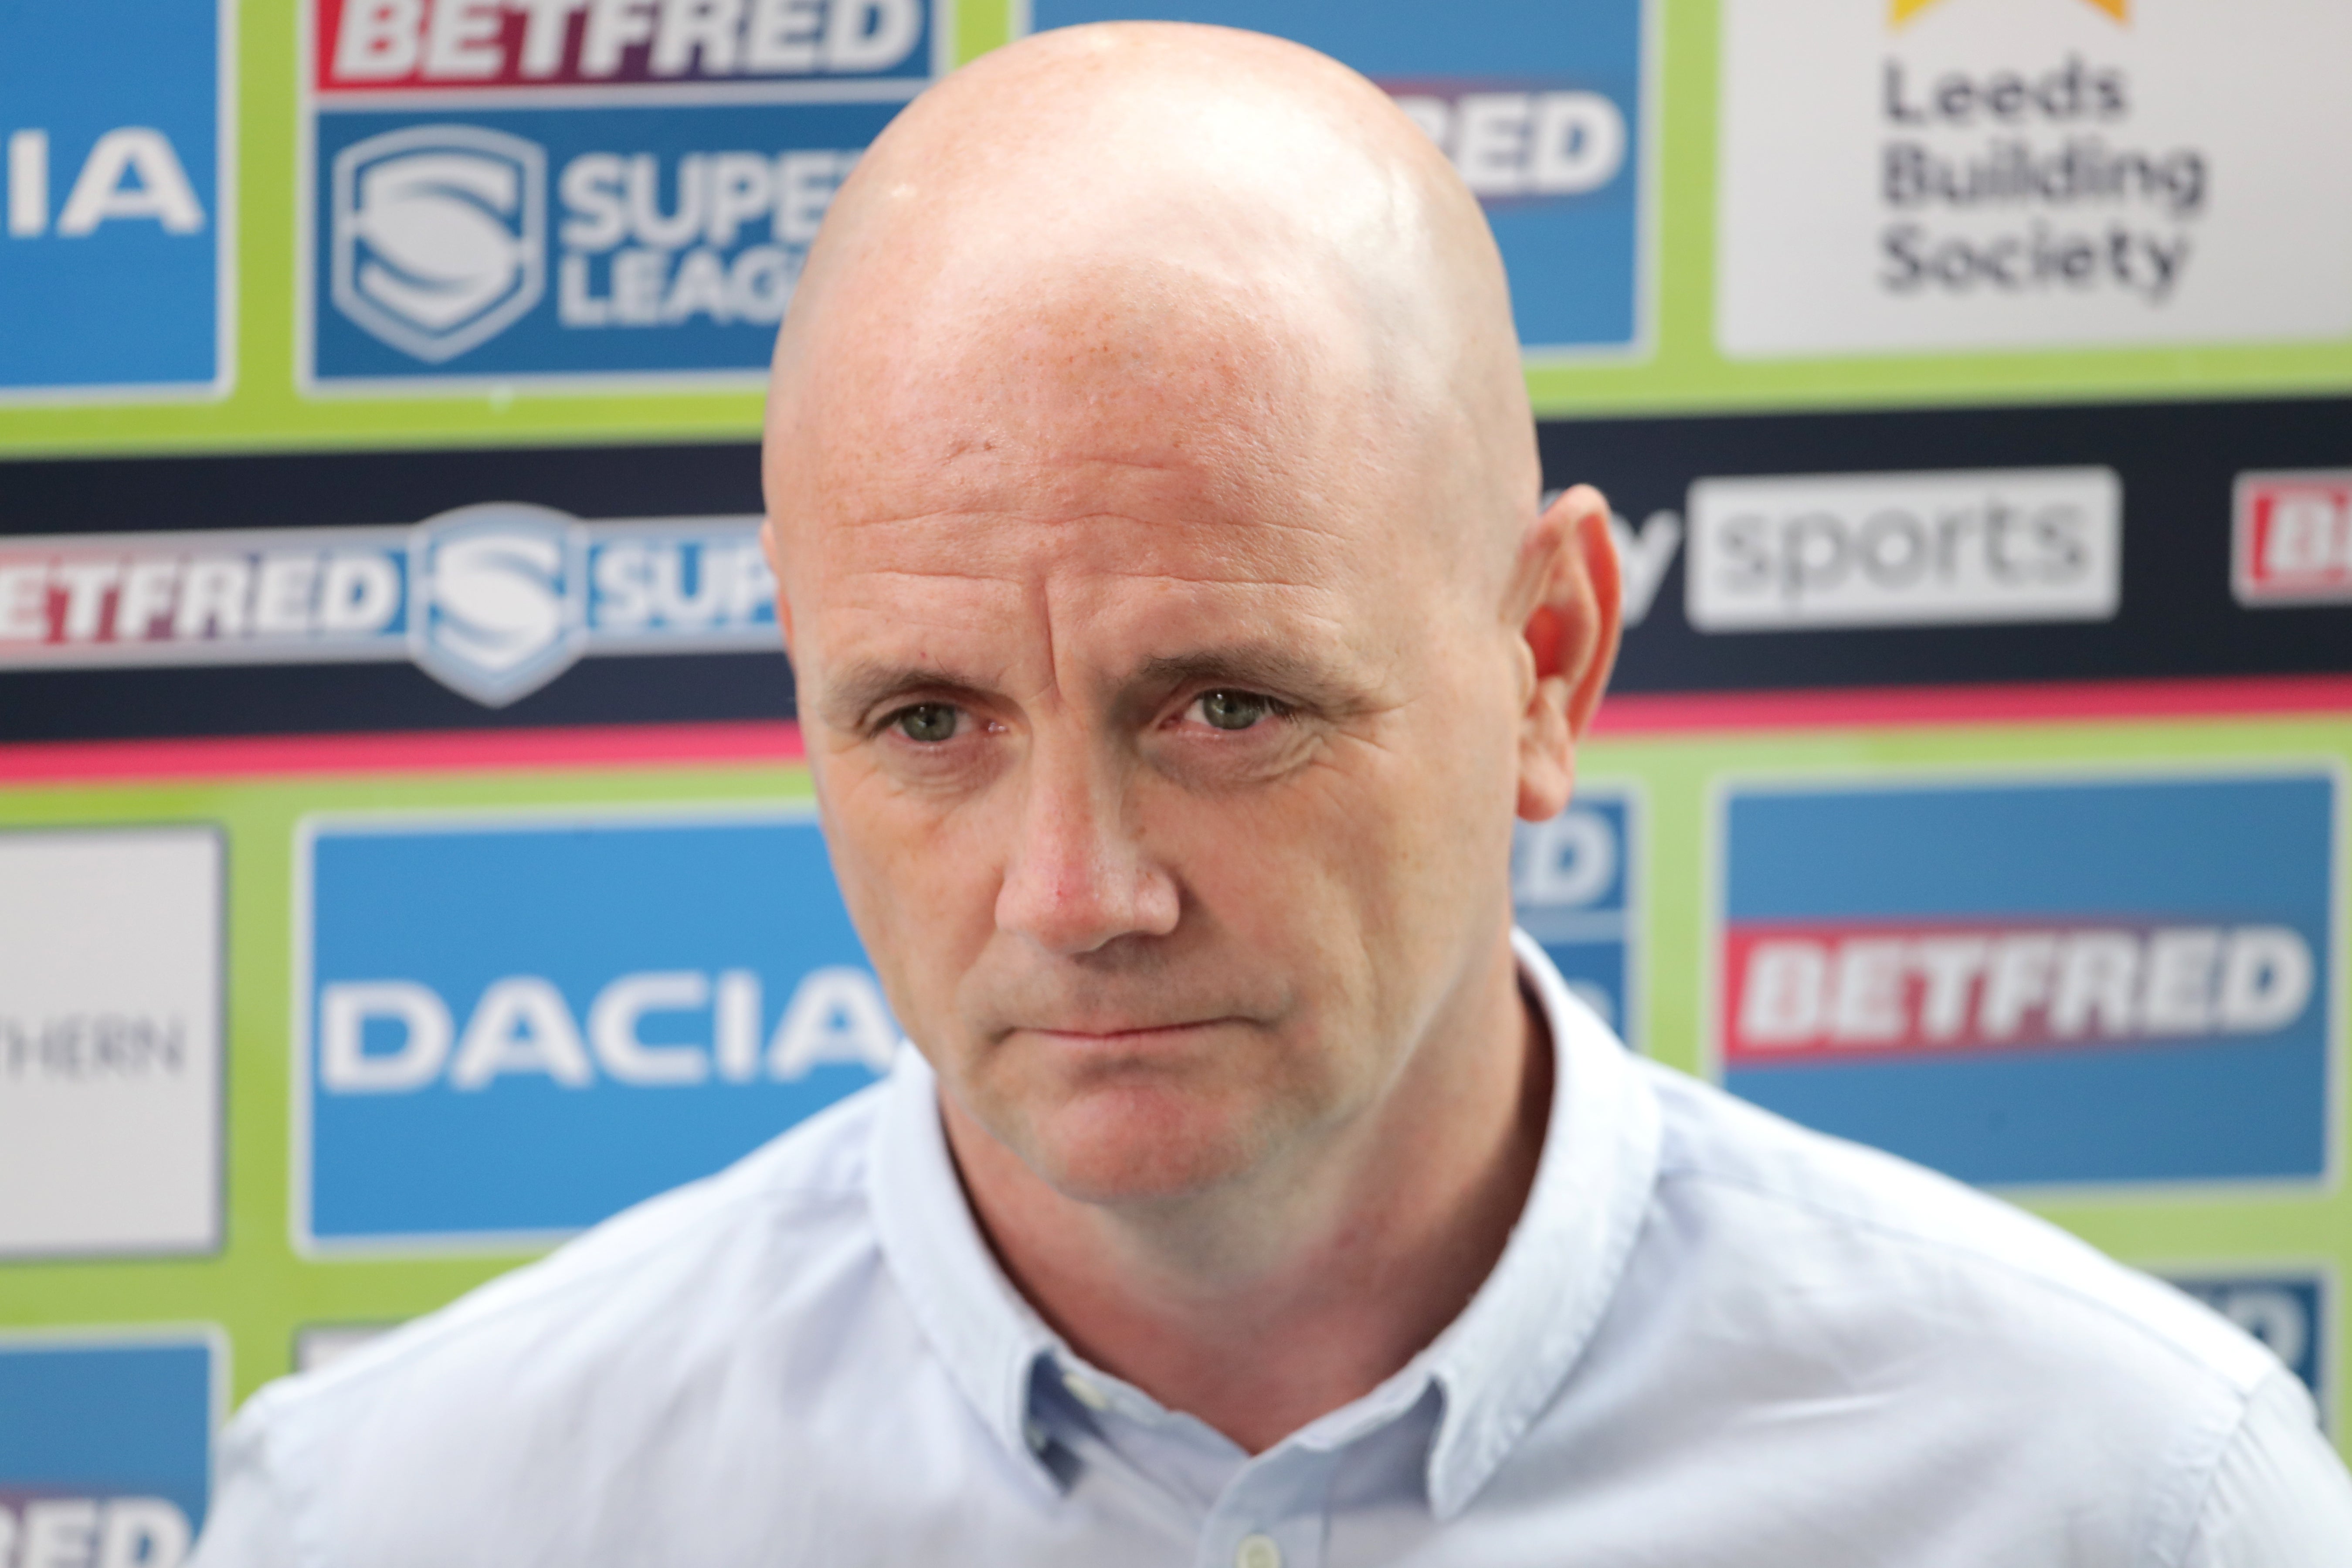 Leeds Rhinos head coach Richard Agar stepped down from the role with the club struggling in the Super League